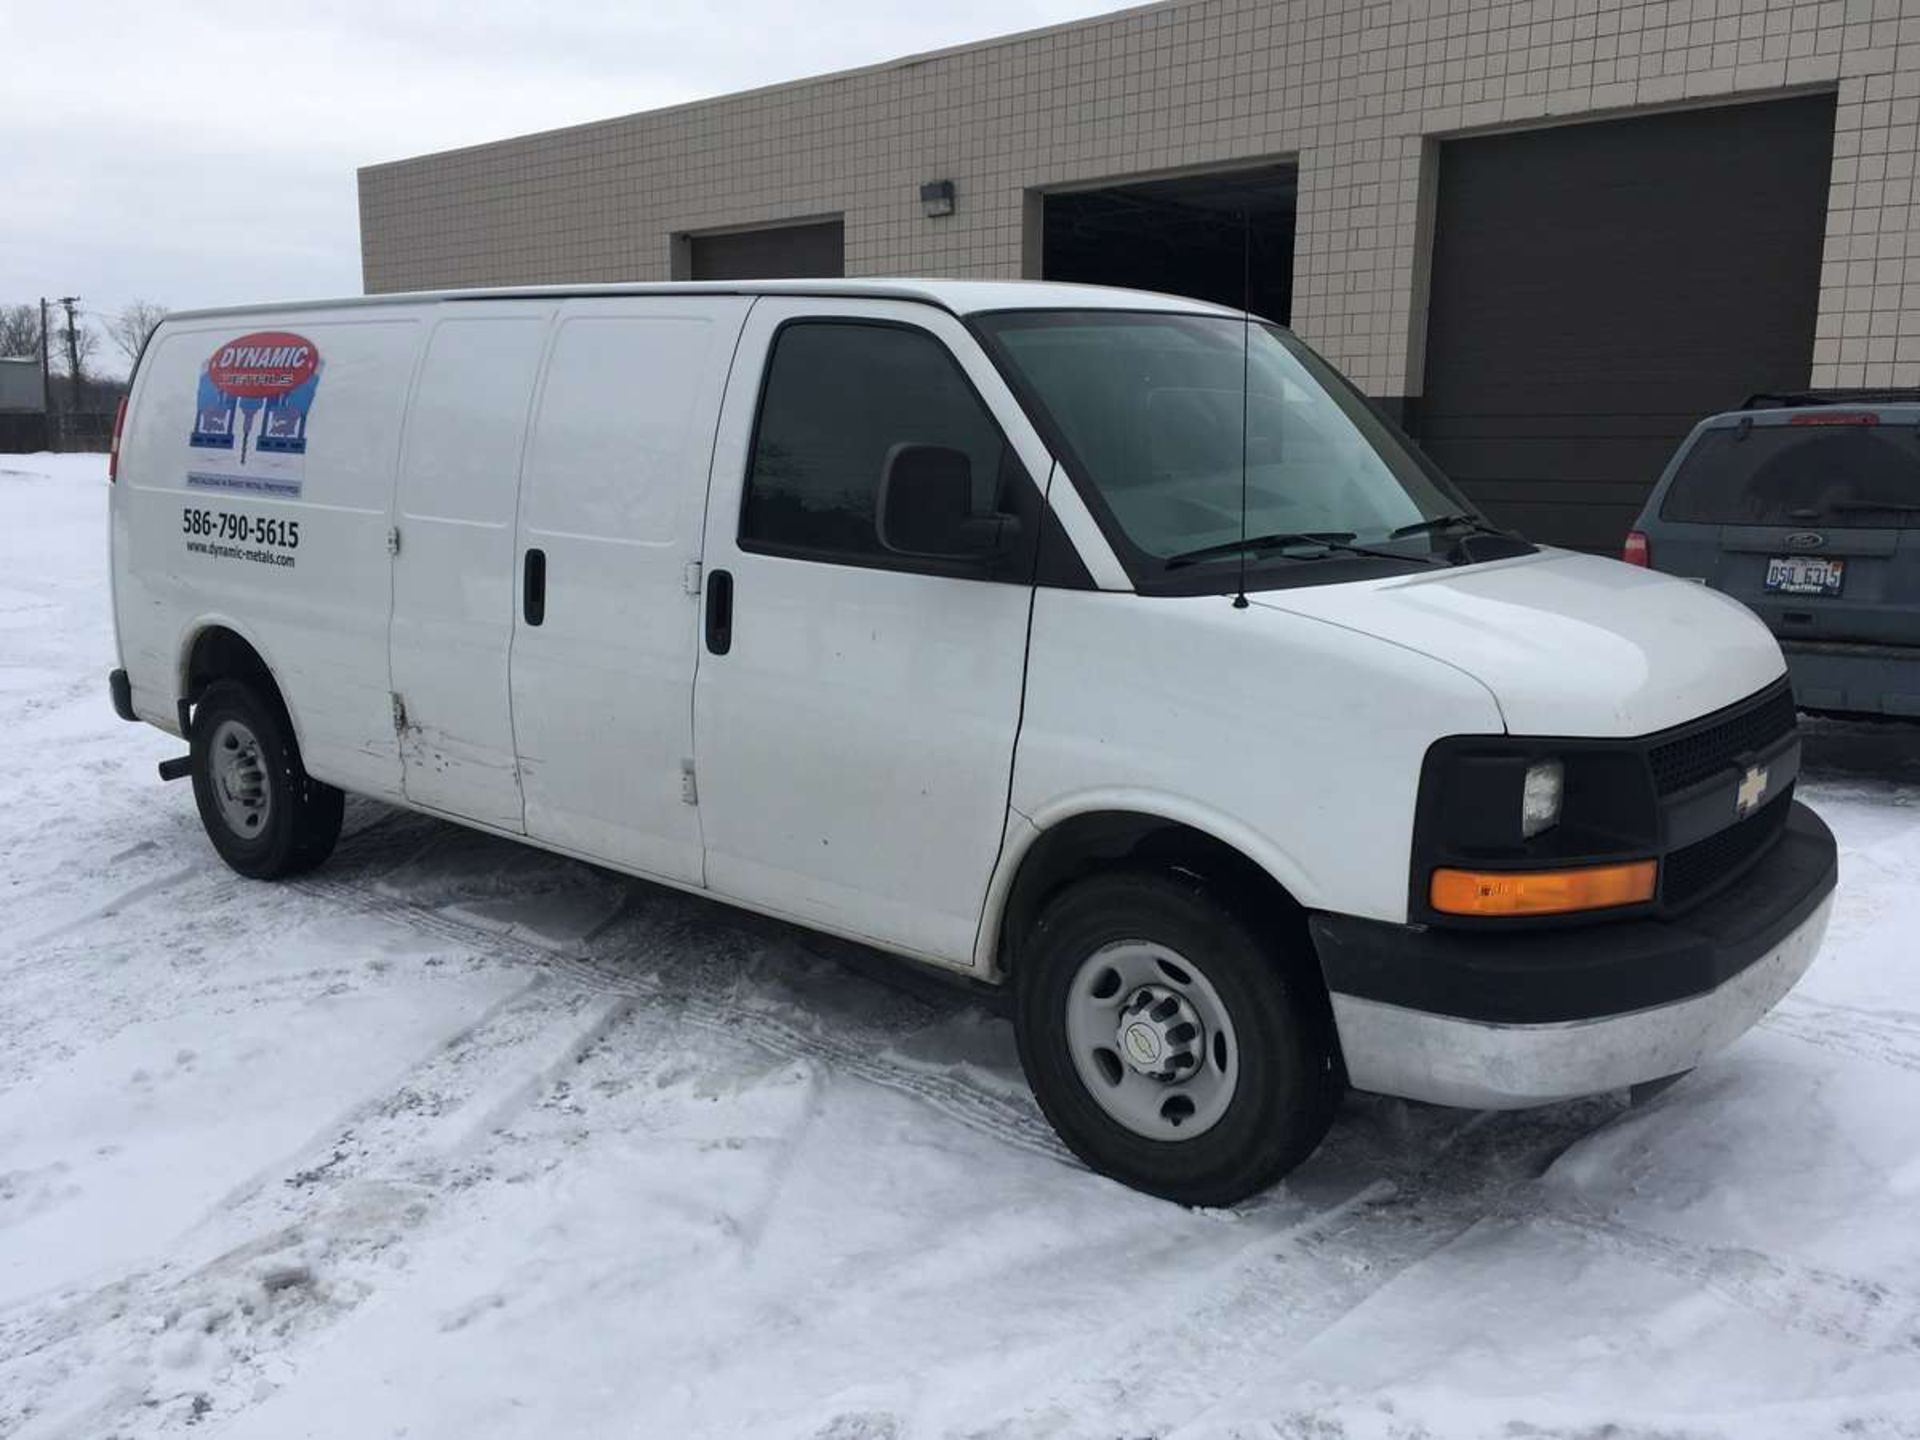 2013 Chevrolet Express 3500 EXT 1 Ton Capacity Extended Cargo Van - Image 3 of 14